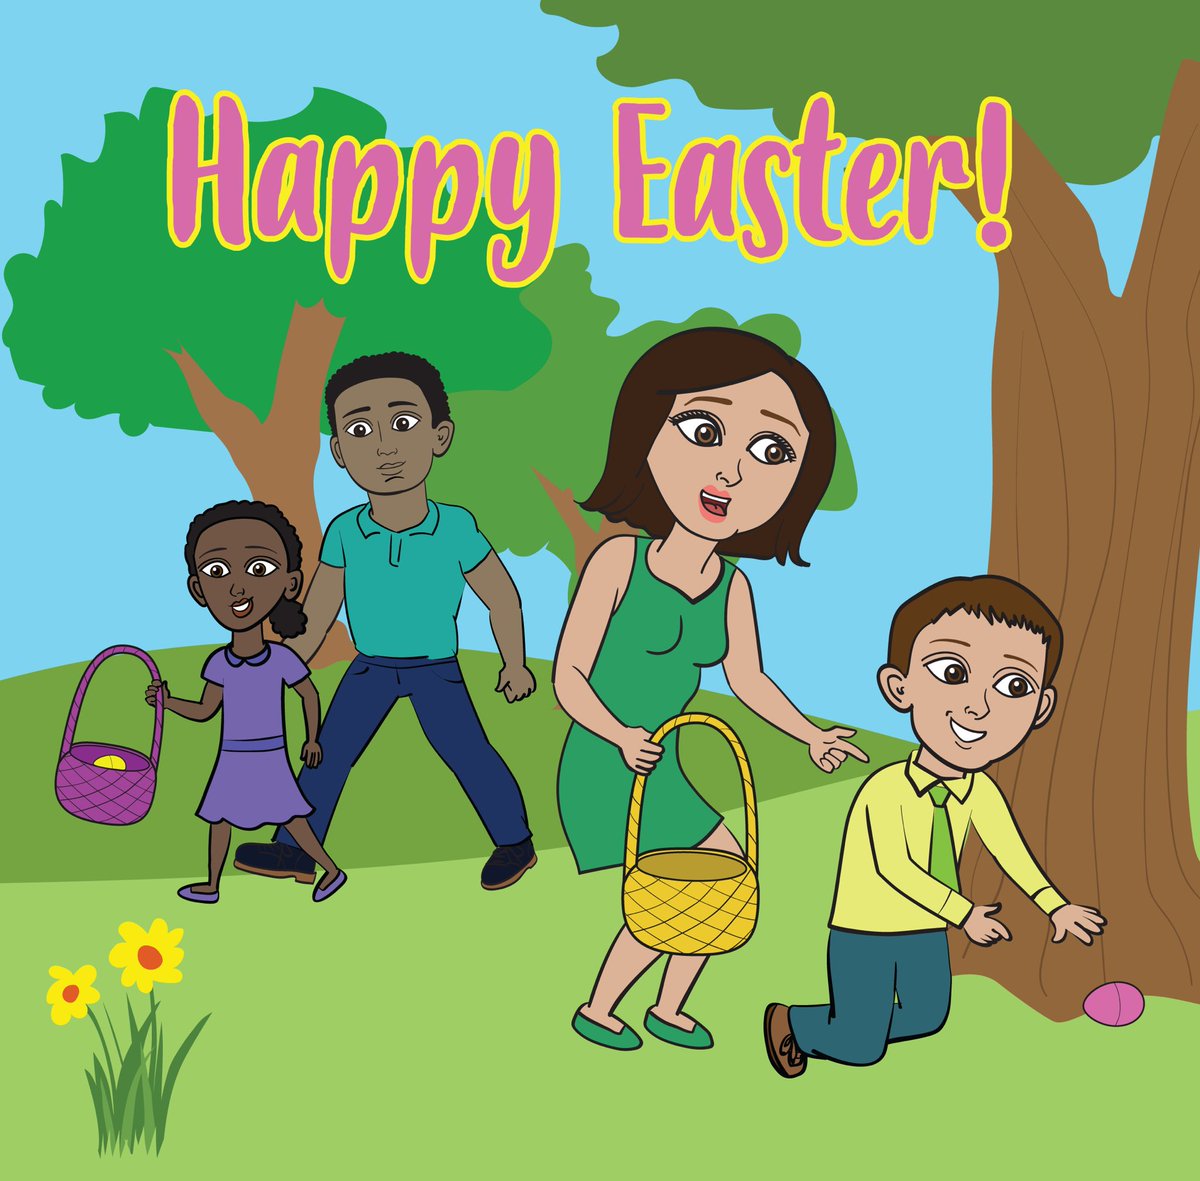 The Easter holiday here! Make it a fun-filled day and avoid sensory overload by practicing the “Easter Egg Hunt” fundamental mini-story on Speech Kingdom! 

#speechkingdom  #spedteachers #specialeducation #autism #ASD #speechtherapy #socialstories #SLP #ADHD #apraxia #sped